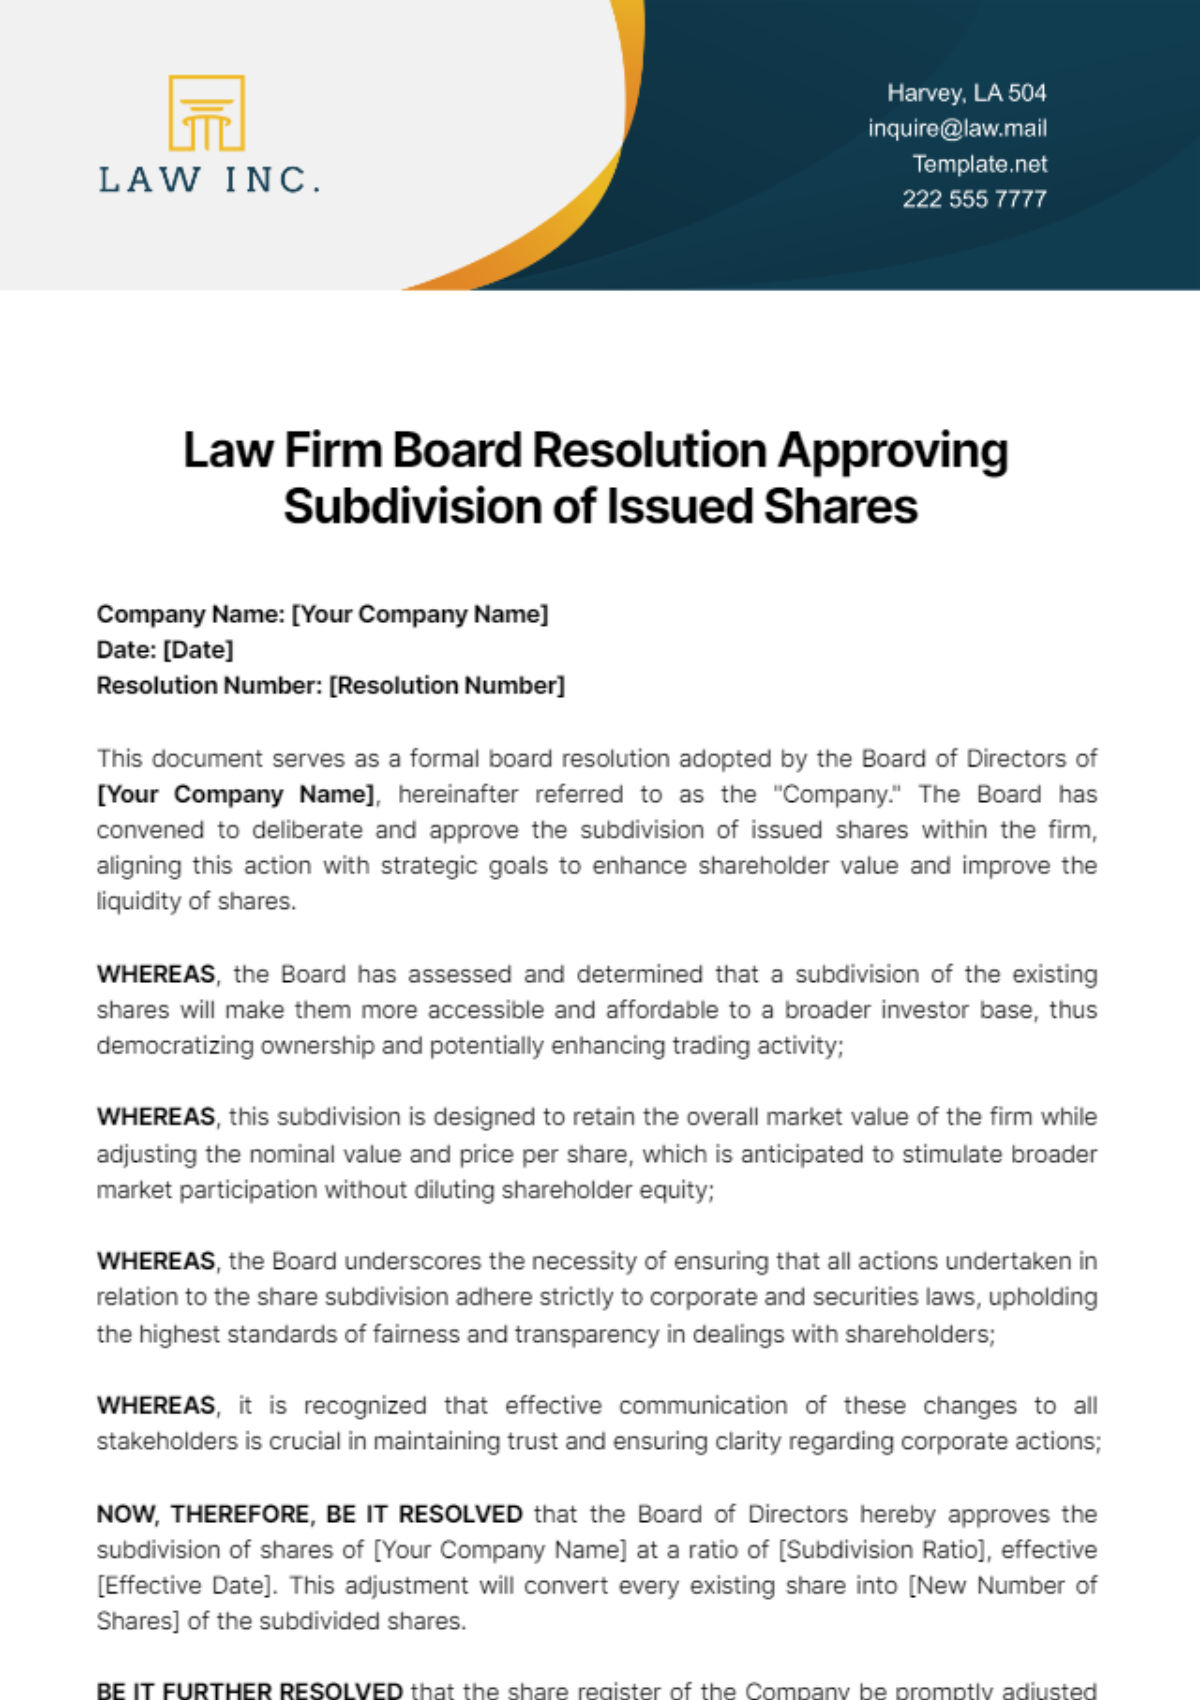 Law Firm Board Resolution Approving Subdivision of Issued Shares Template